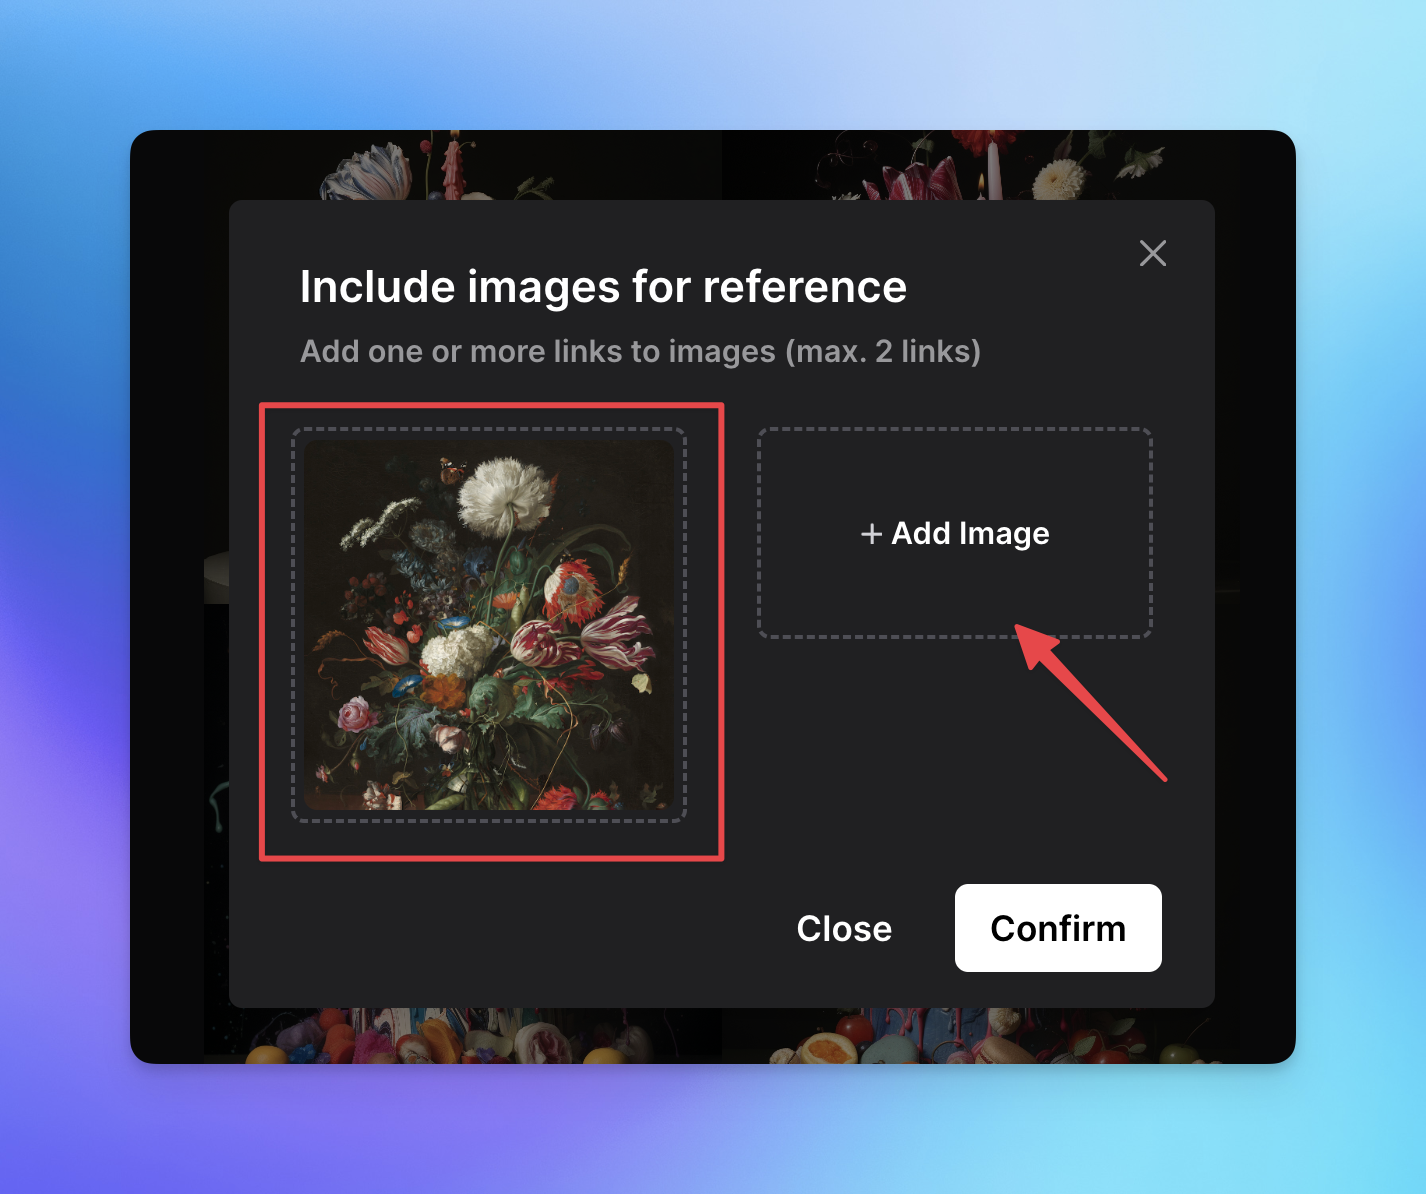 New Options for Reference Images